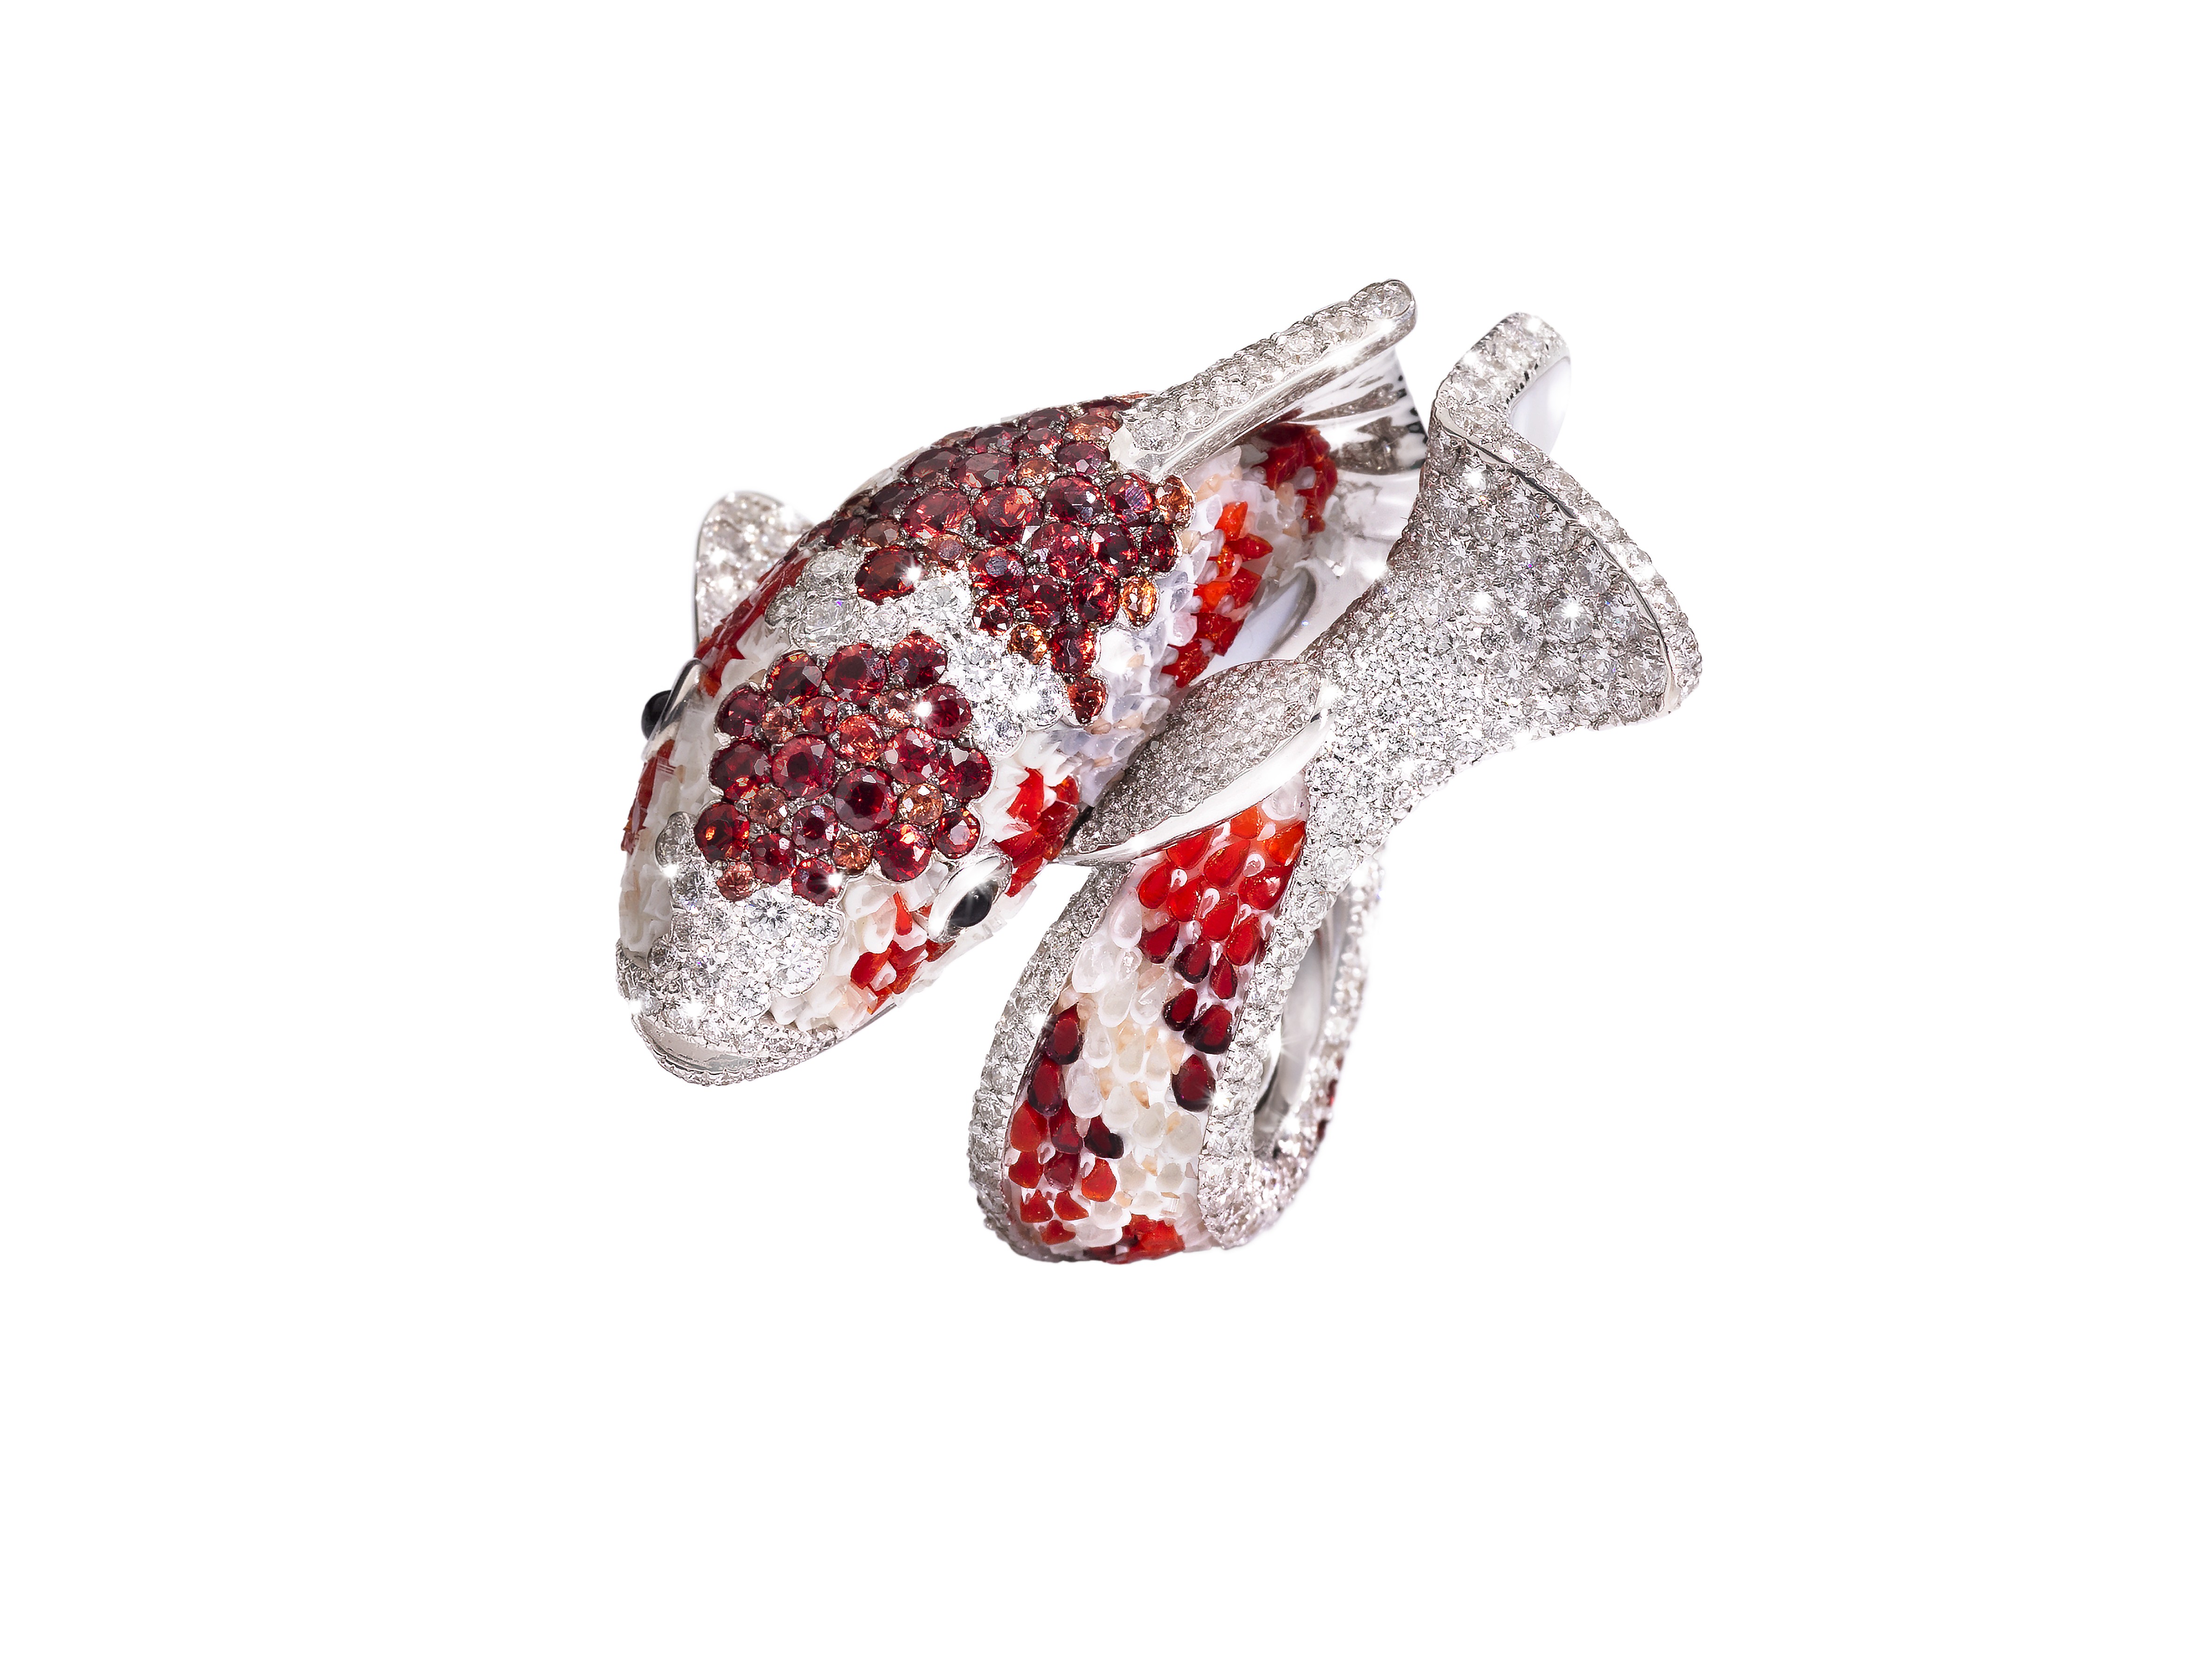 A ring from the Koi collection by Italian jeweller SICIS Jewels, inspired by an ancient Chinese legend of a carp turned into a dragon by the gods.